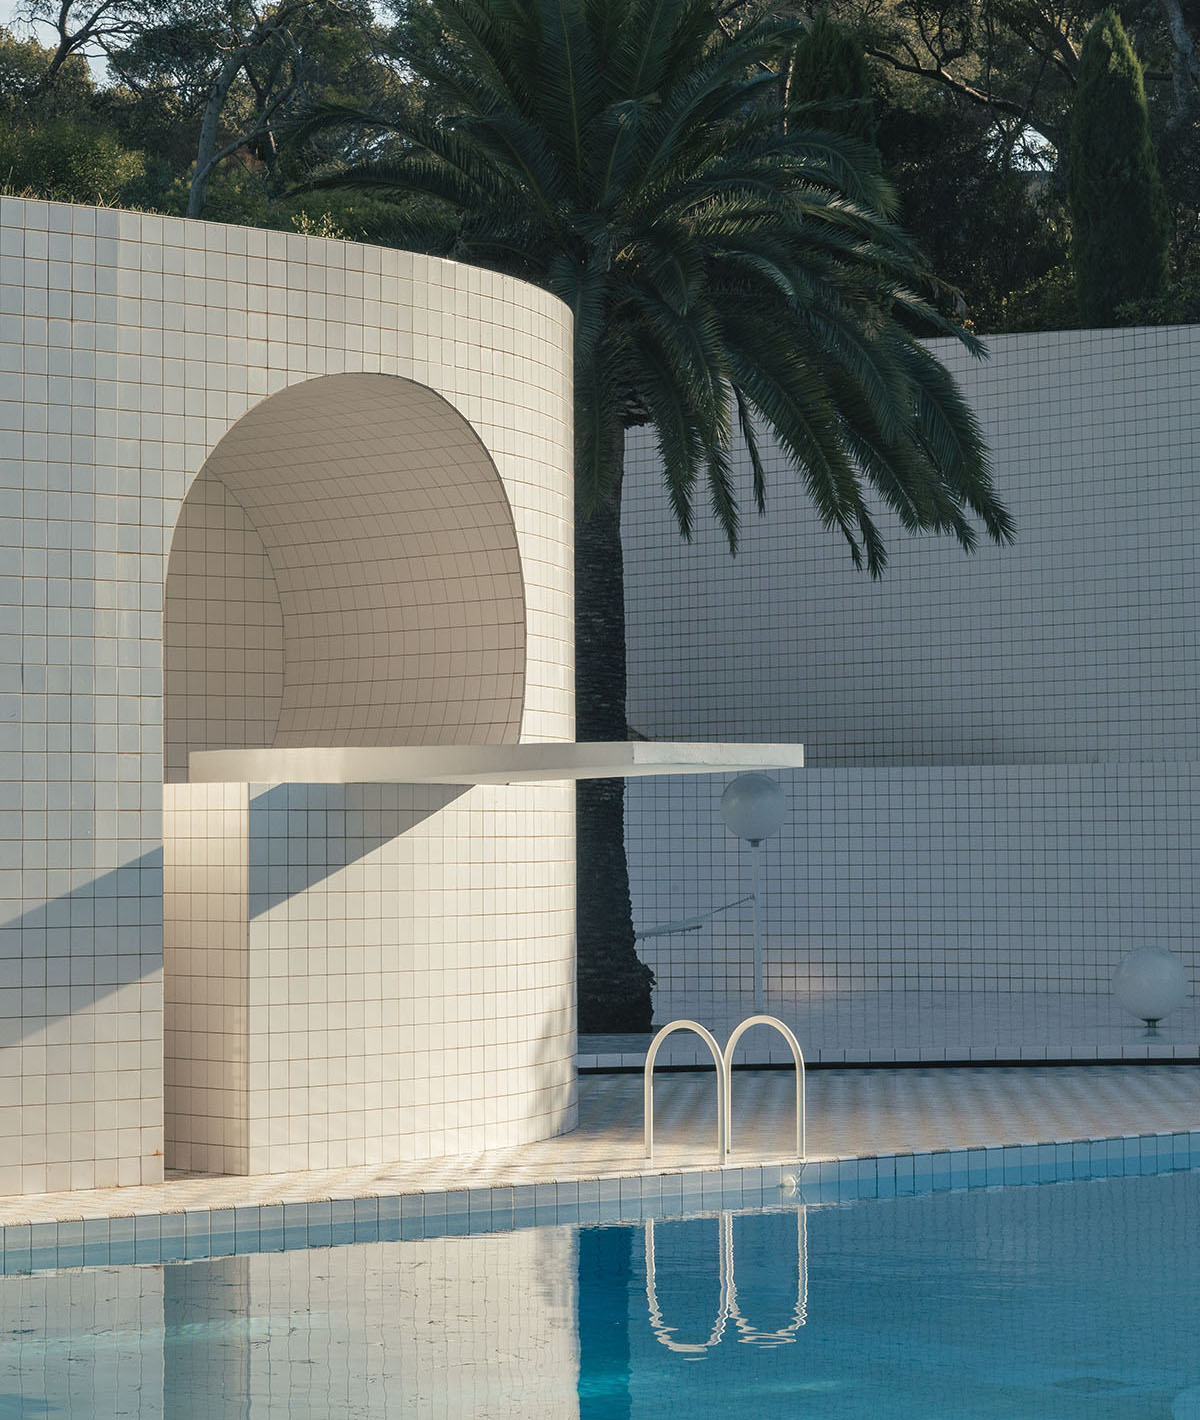 Domestic Pools exhibition explores architecture of private pools as ...